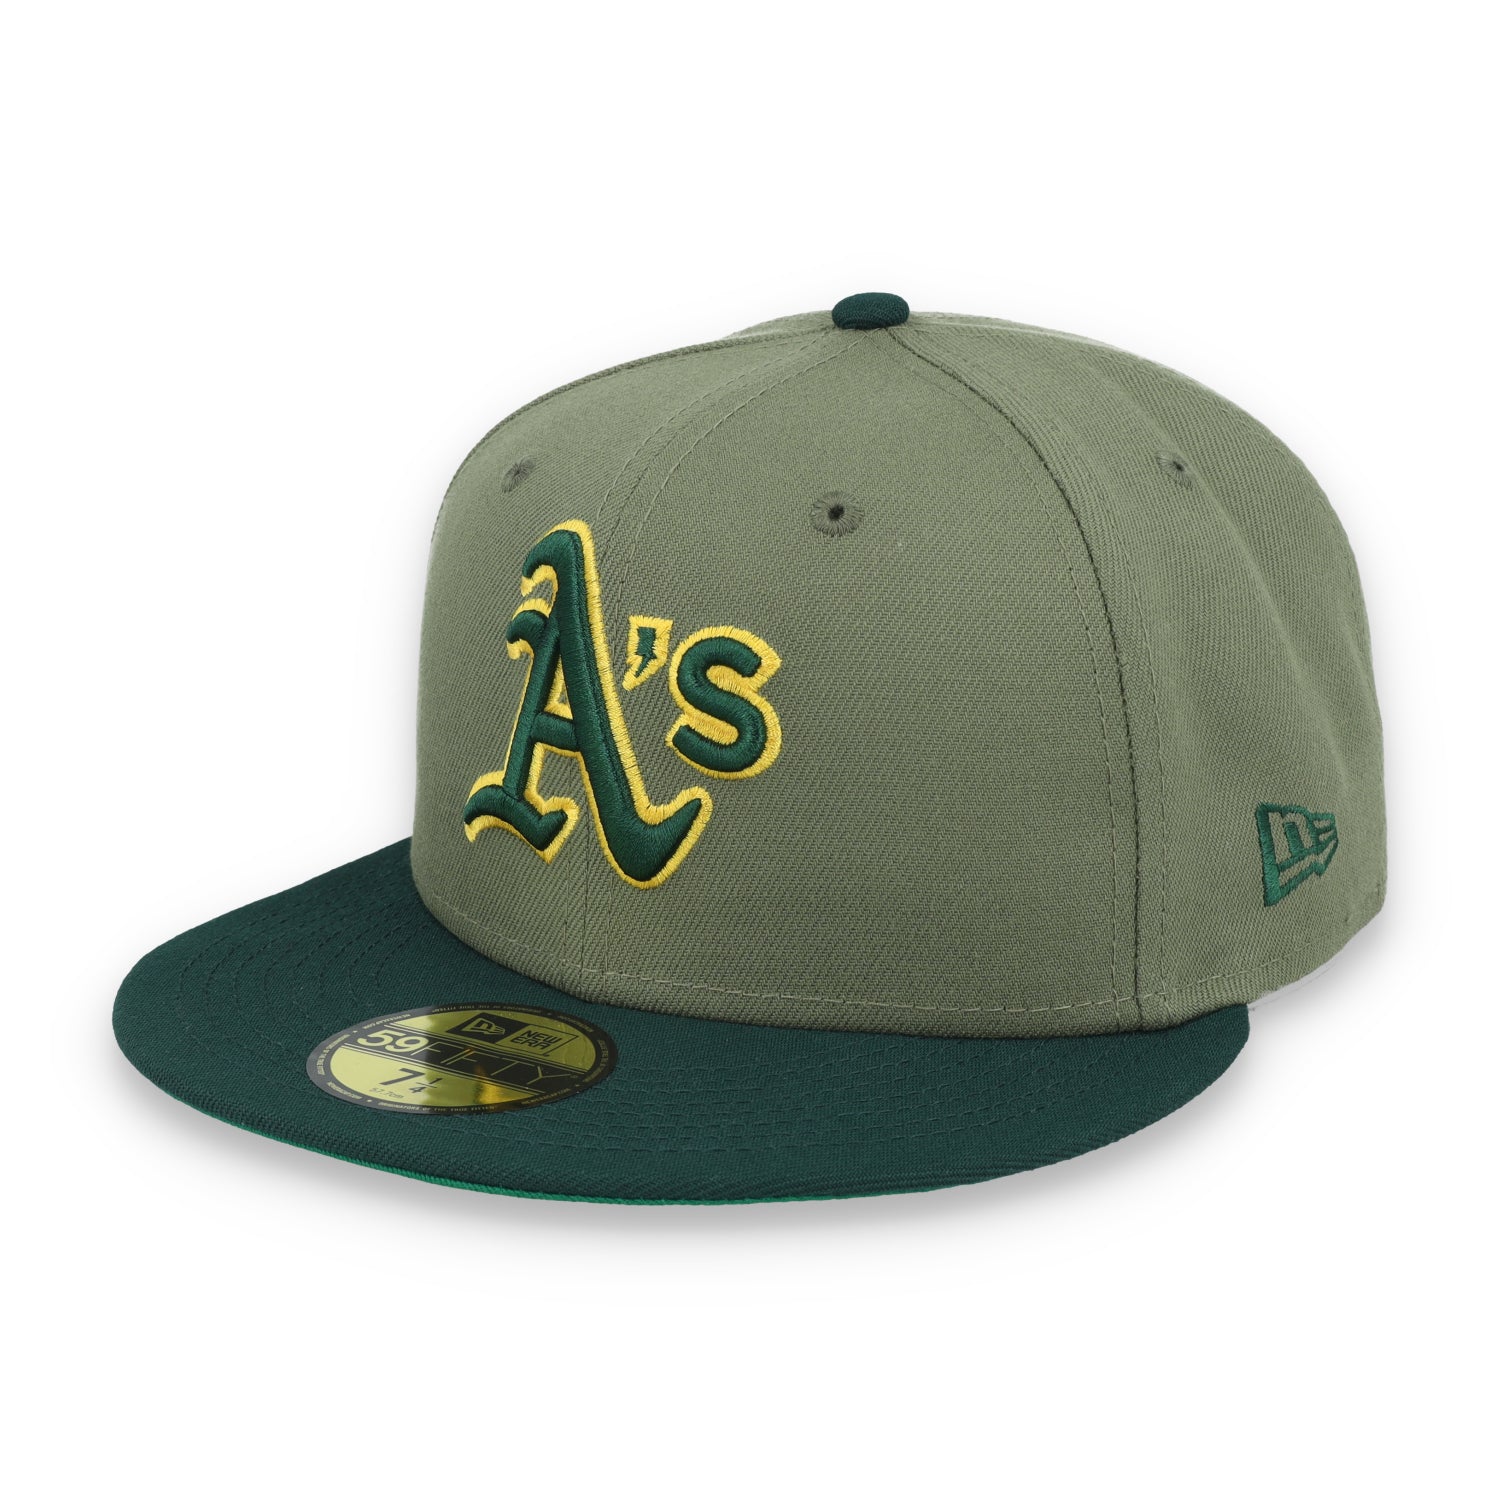 New Era Oakland Athletics 40th Anniversary Side Patch 59FIFTY Fitted Hat- Olive Green